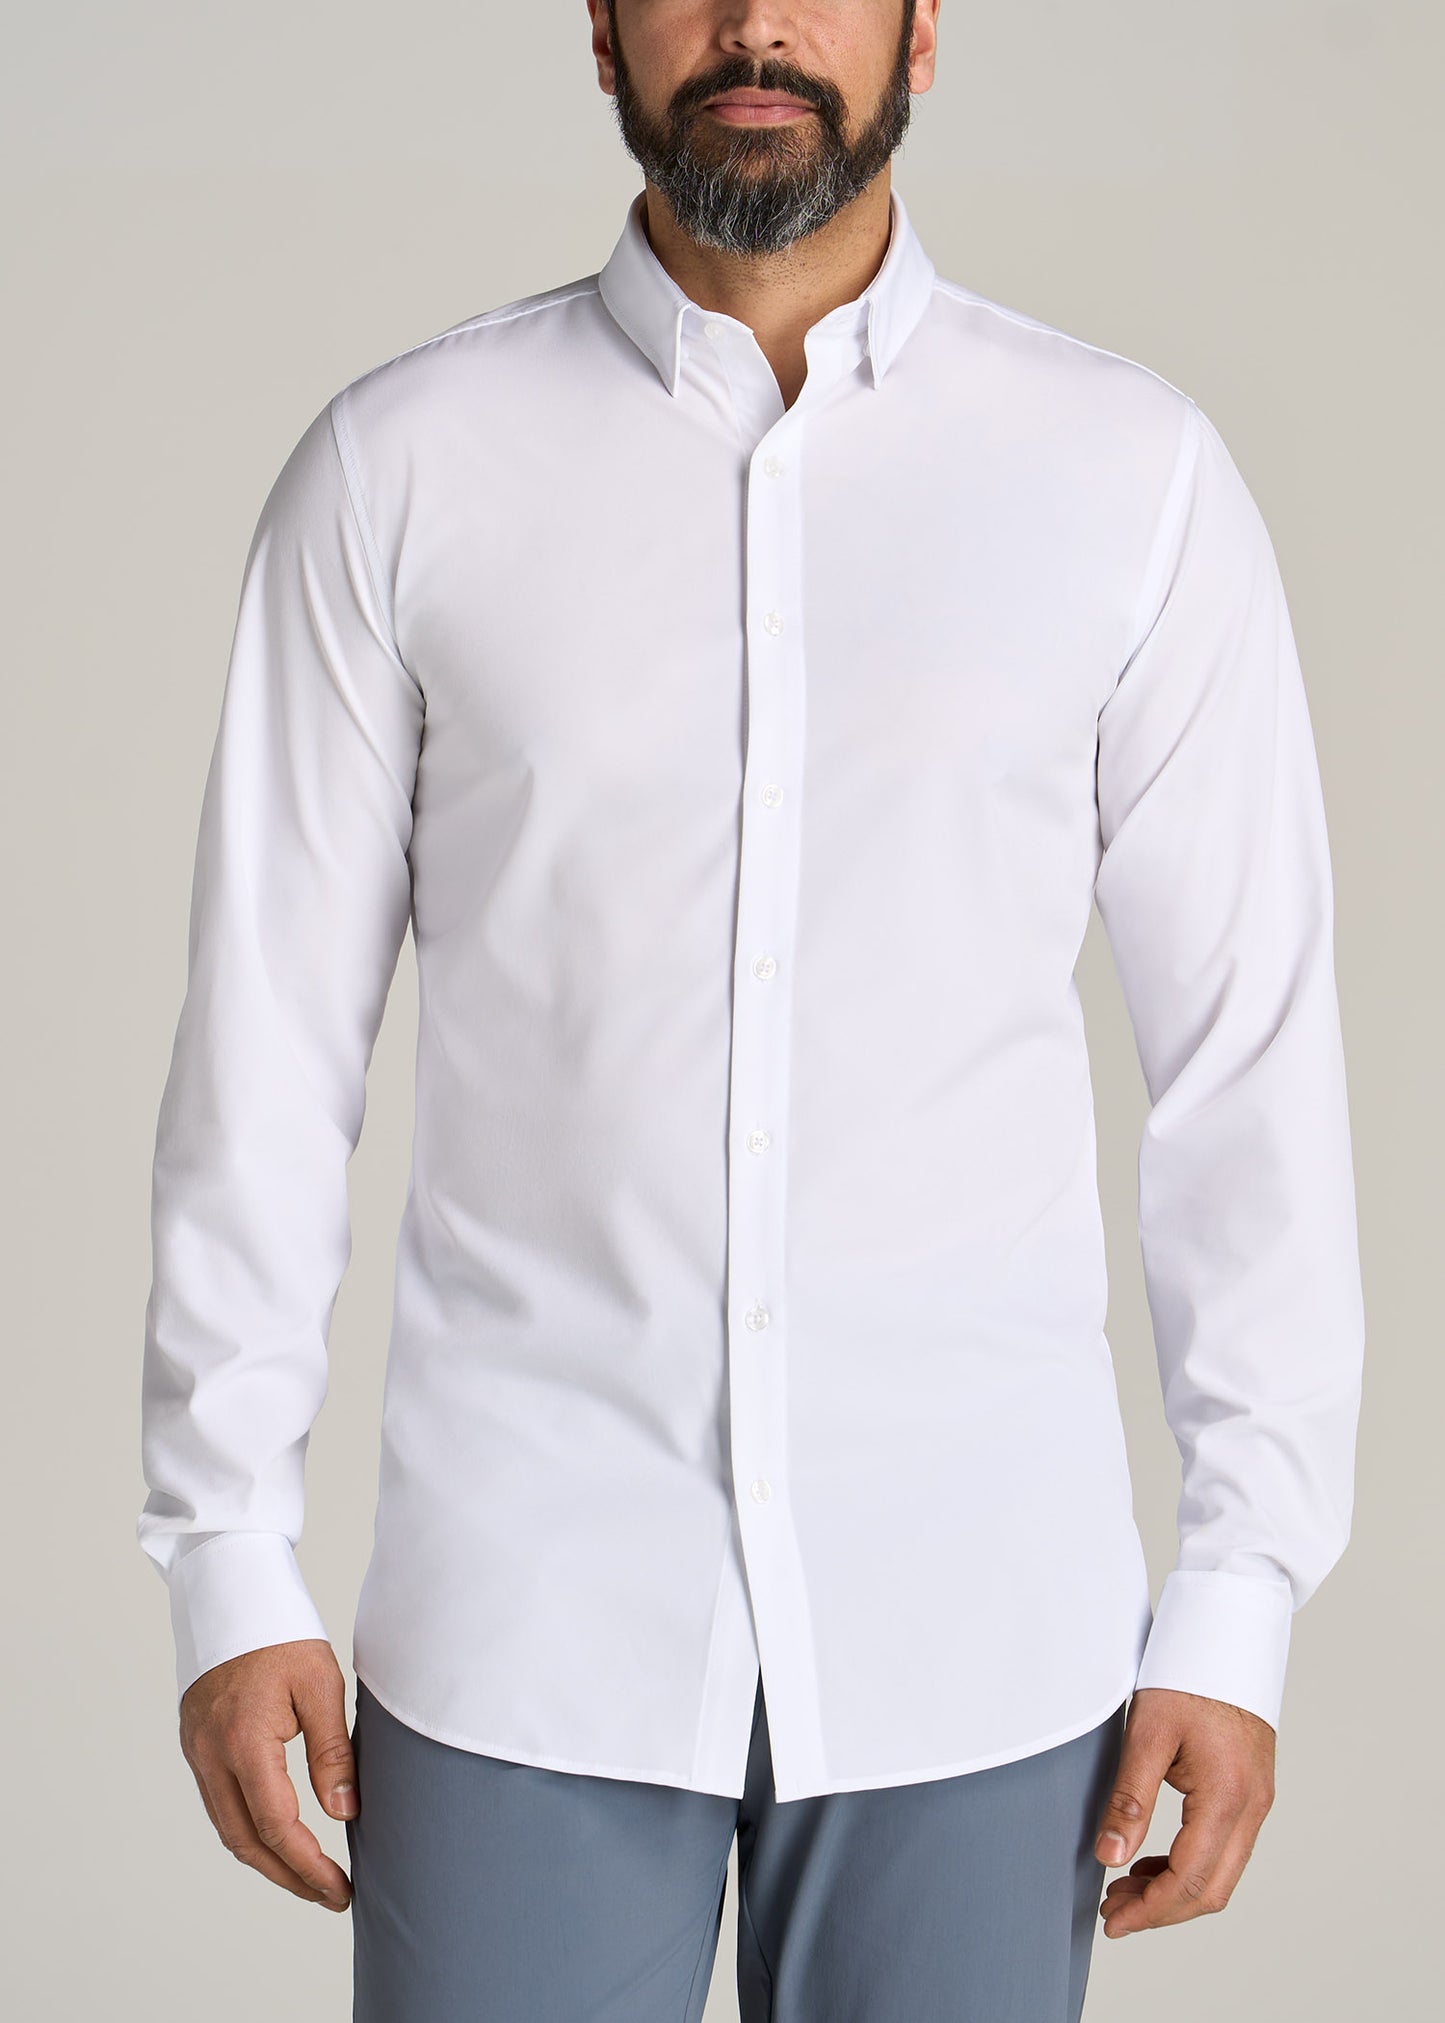 Tall guy wearing American Tall's Traveler Stretch Dress Shirt in the color White.